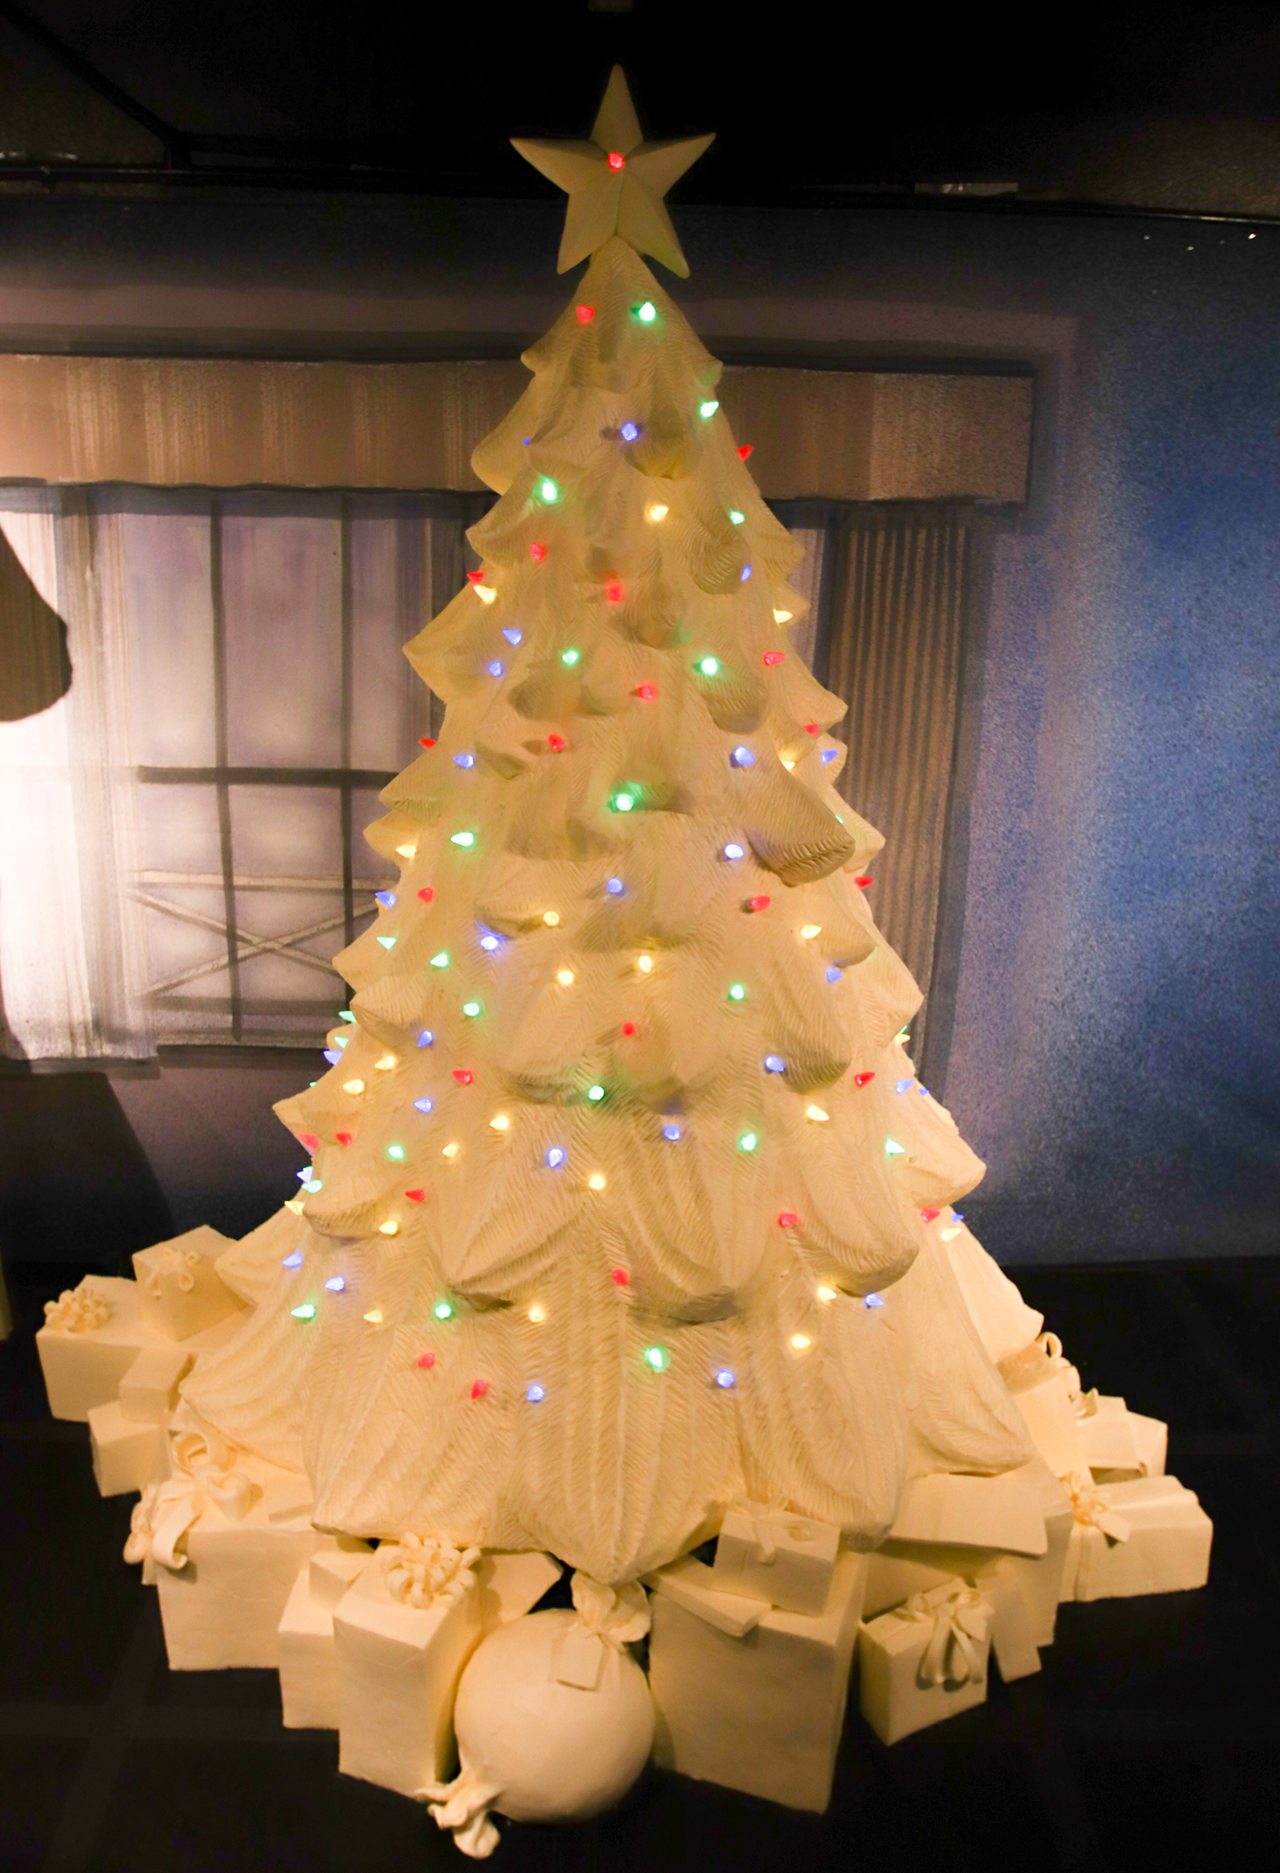 Sculptors incorporated twinkling lights into the Christmas tree butter sculpture.